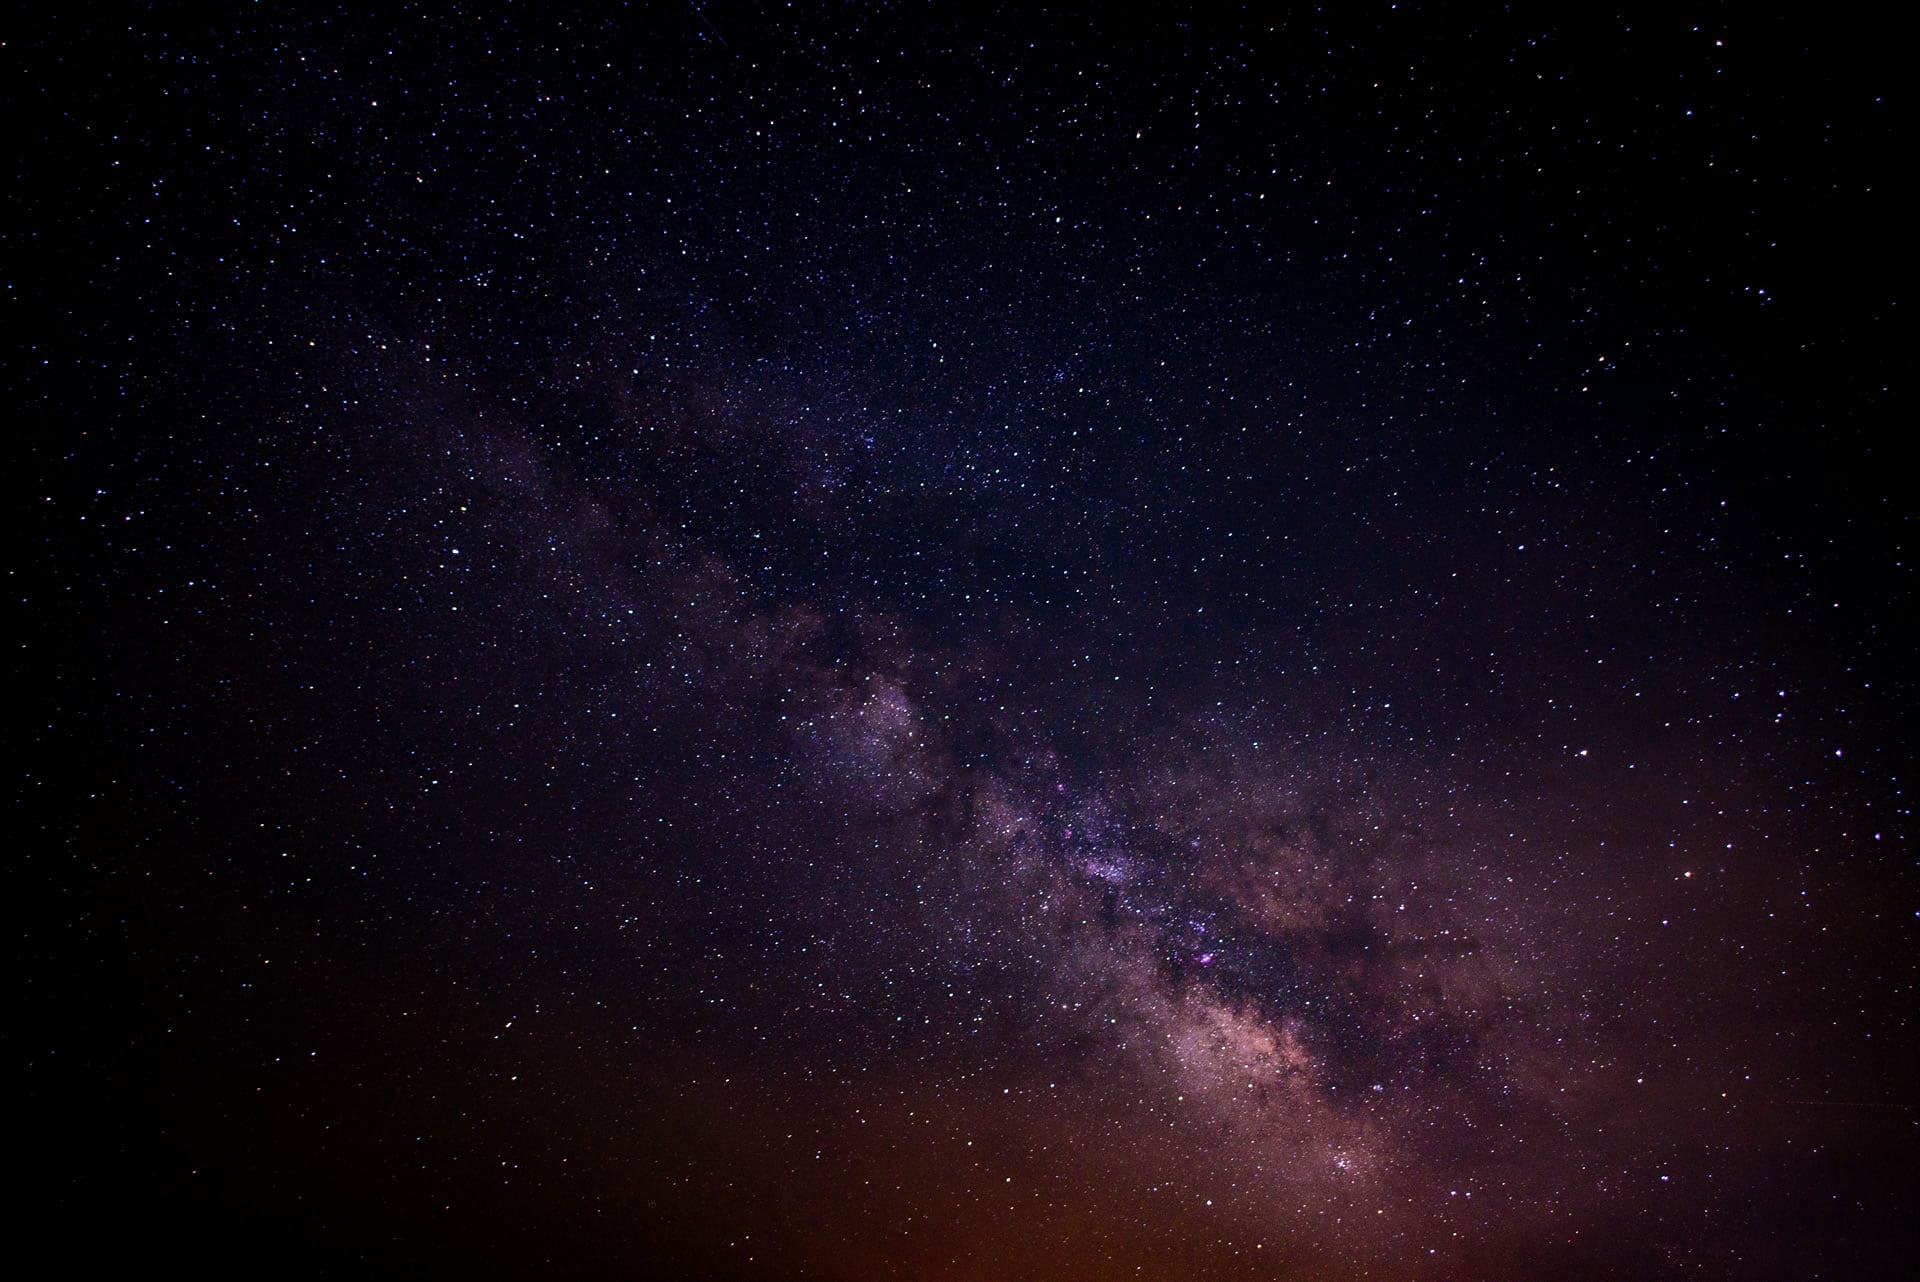 Stars in the night sky, photograph by Nathan Anderson, accessed via Unsplash.